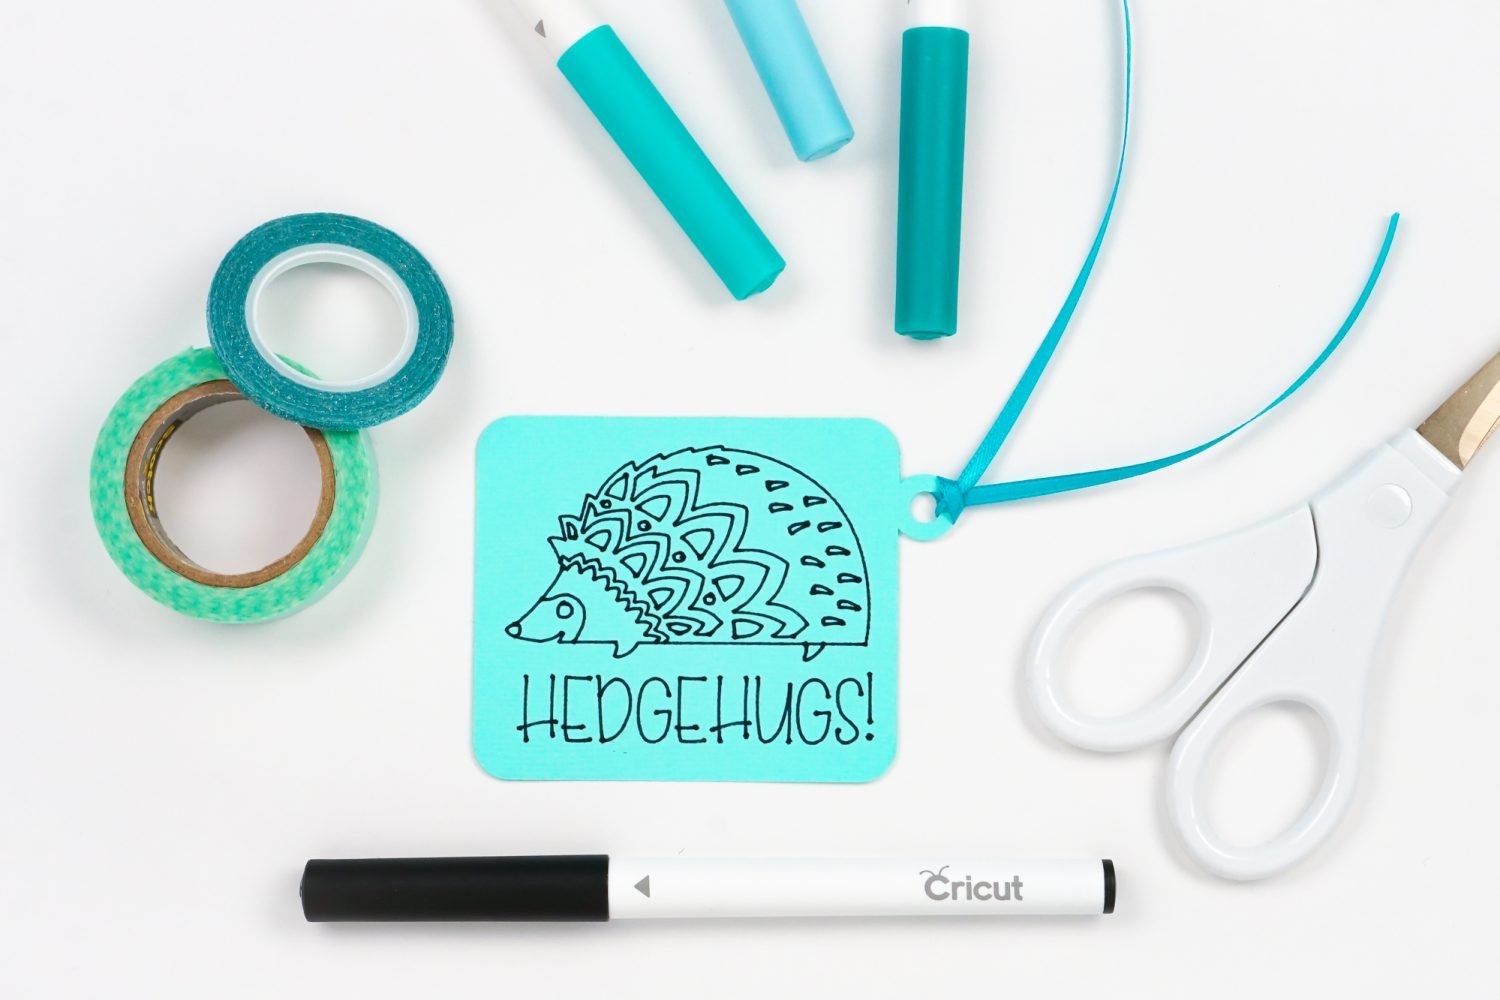 Hedgehugs tag made with Cricut, cardstock, and pen